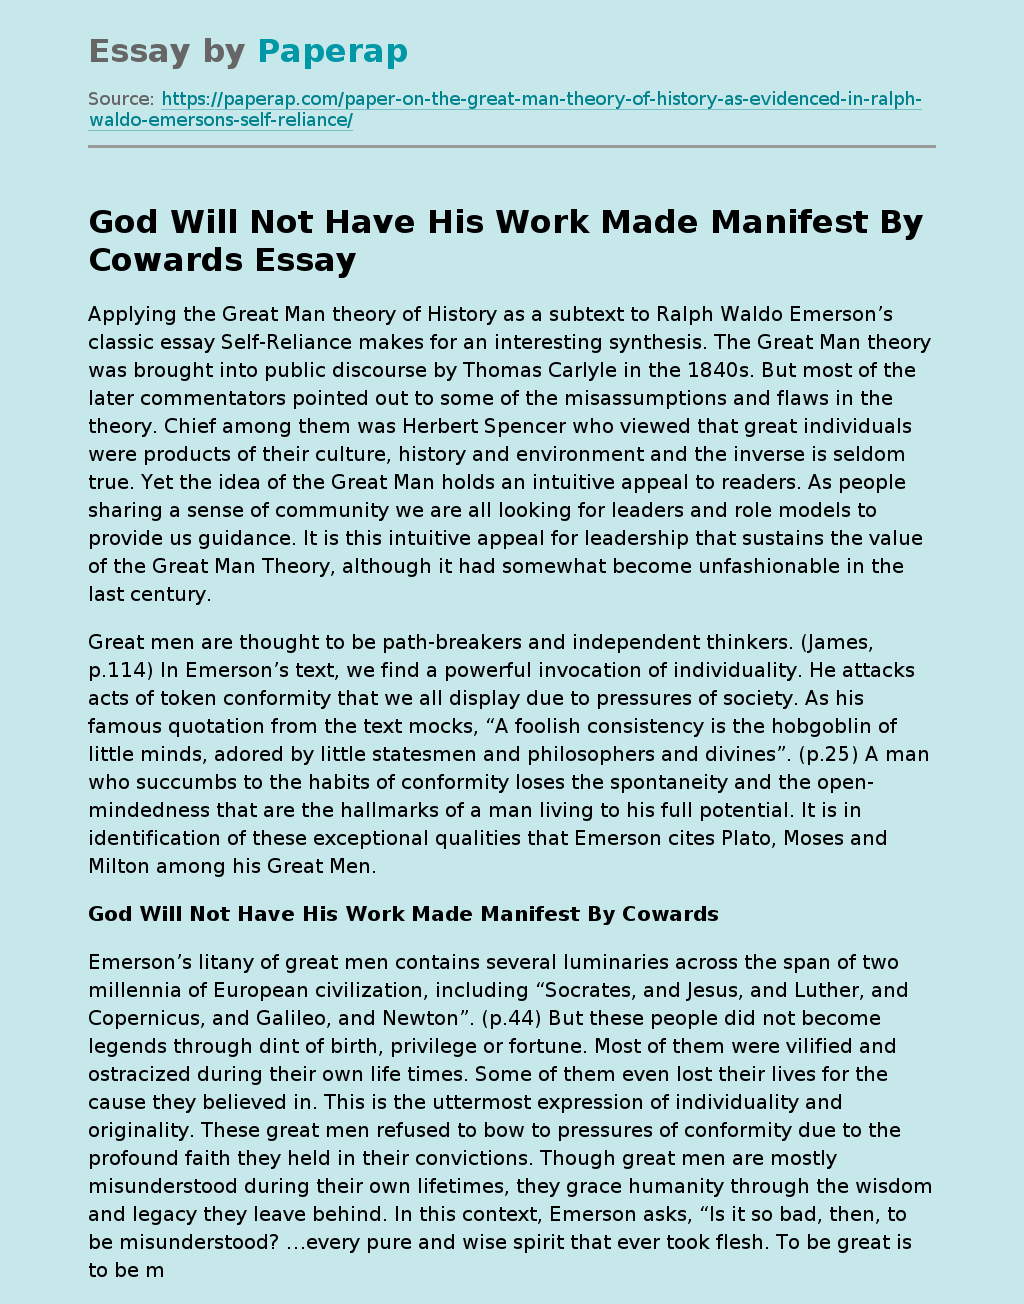 God Will Not Have His Work Made Manifest By Cowards